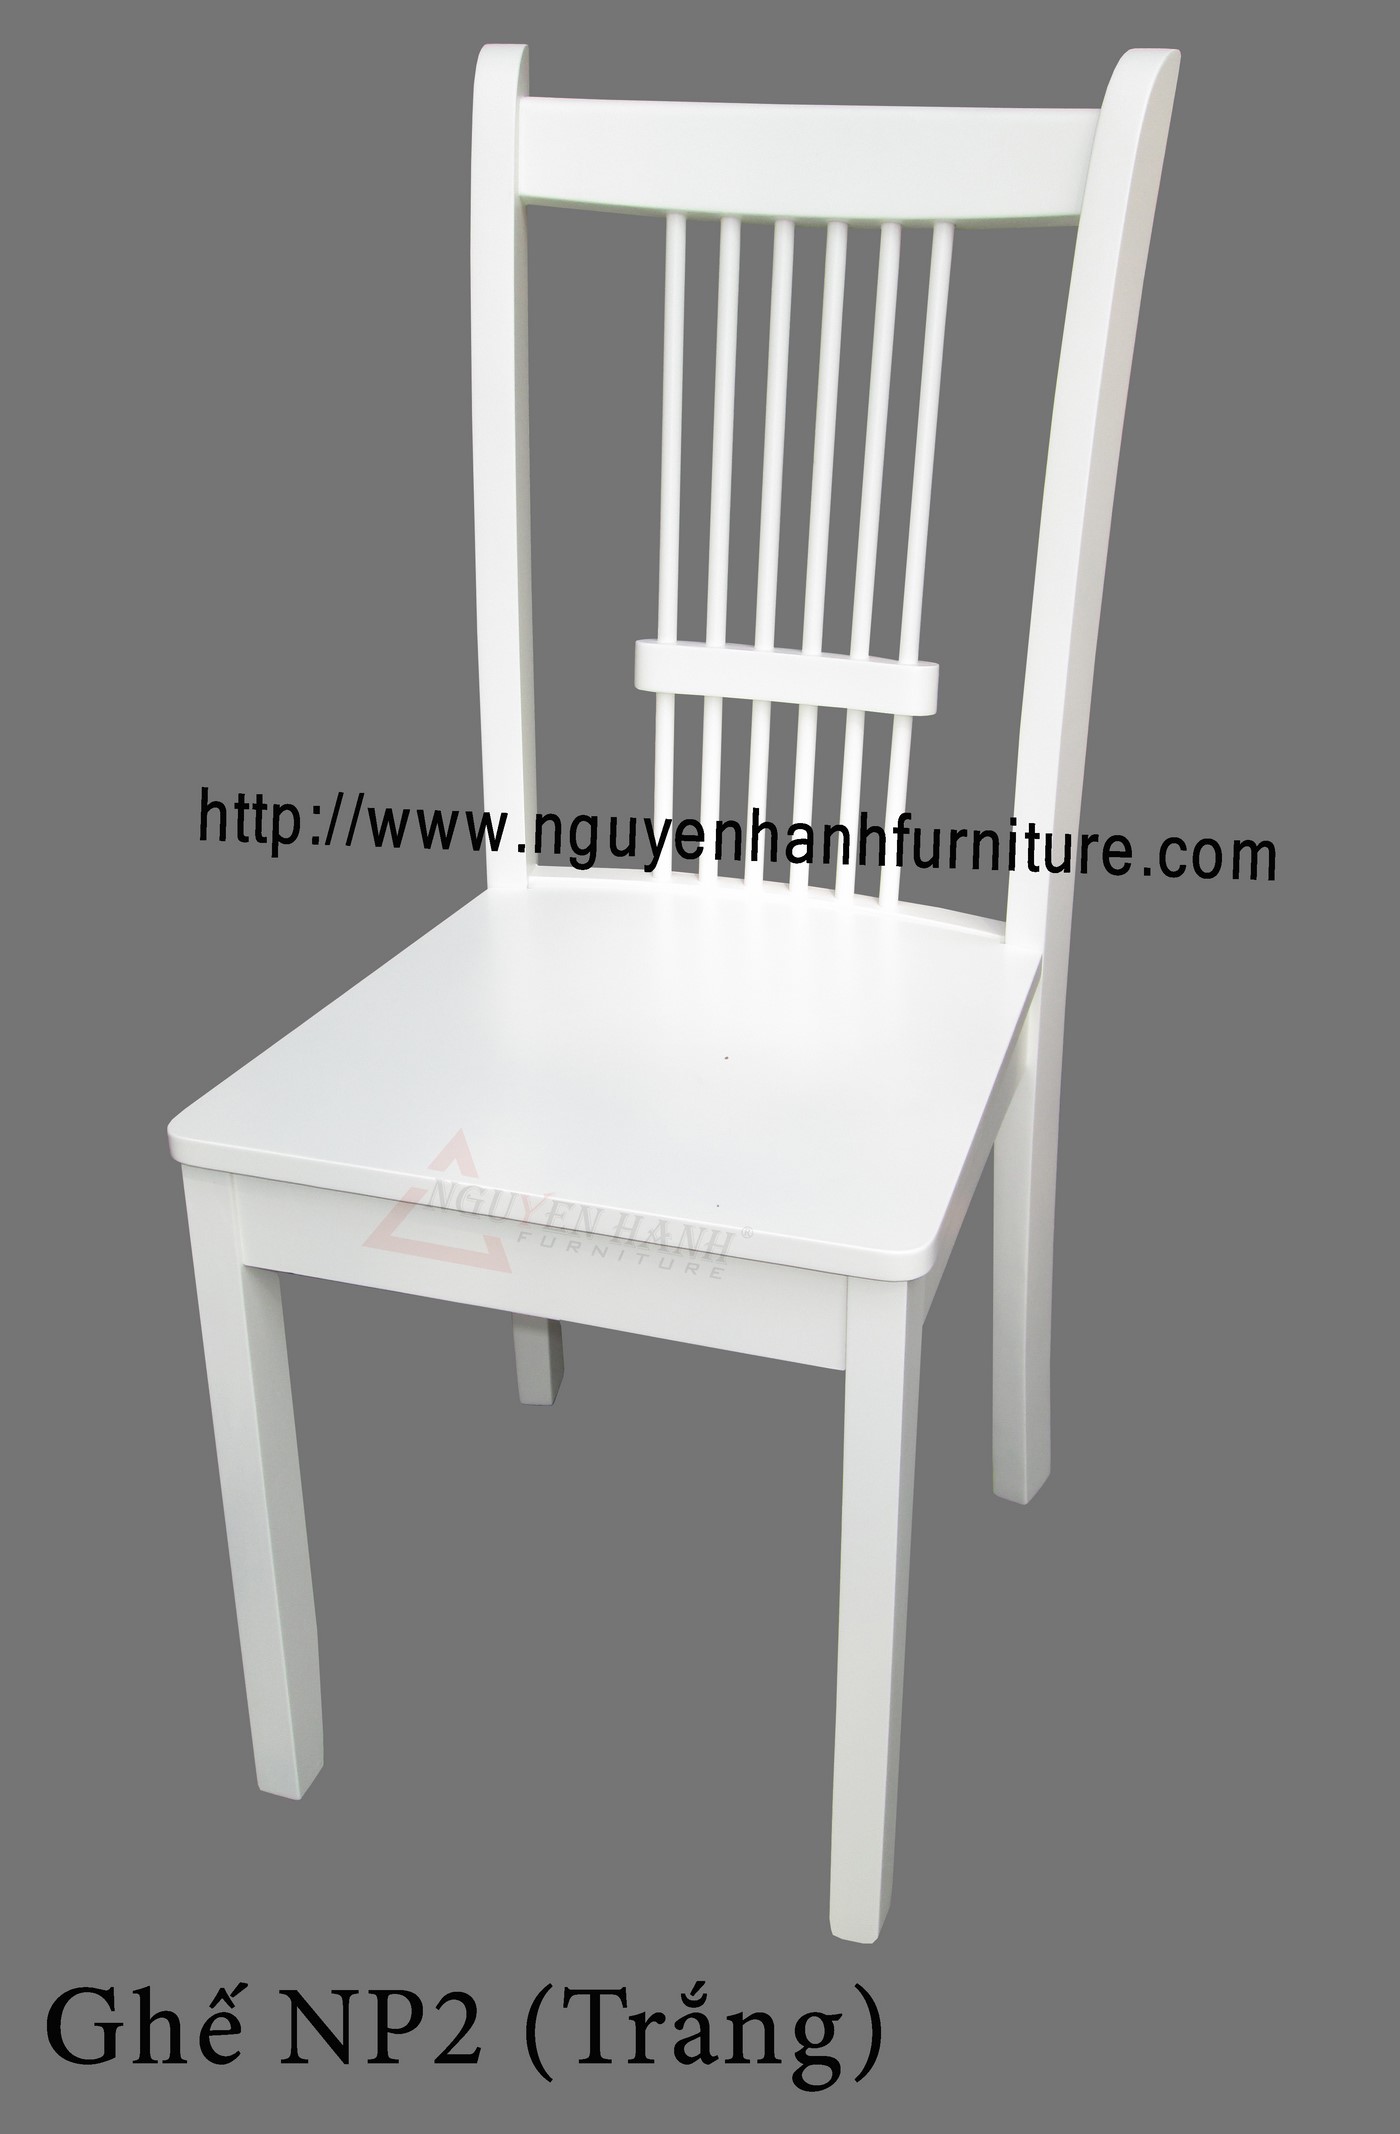 Name product: NP2 chair (White) - Dimensions: - Description: Wood natural rubber